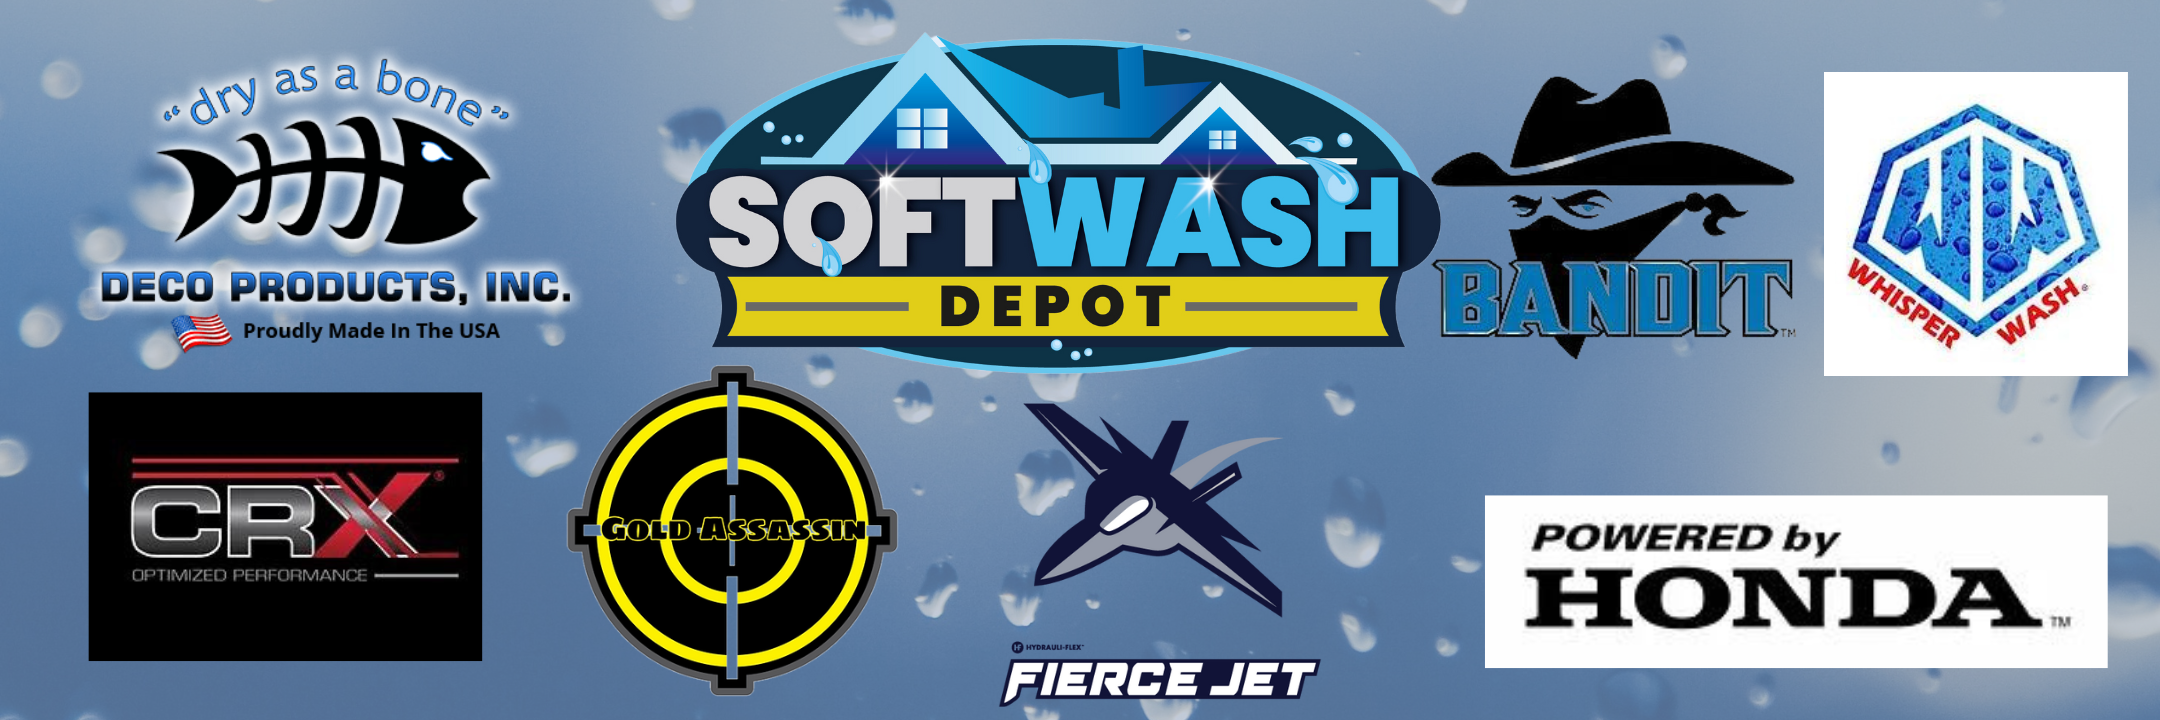 Best soft washing & pressure washing supply store located in Florida. 